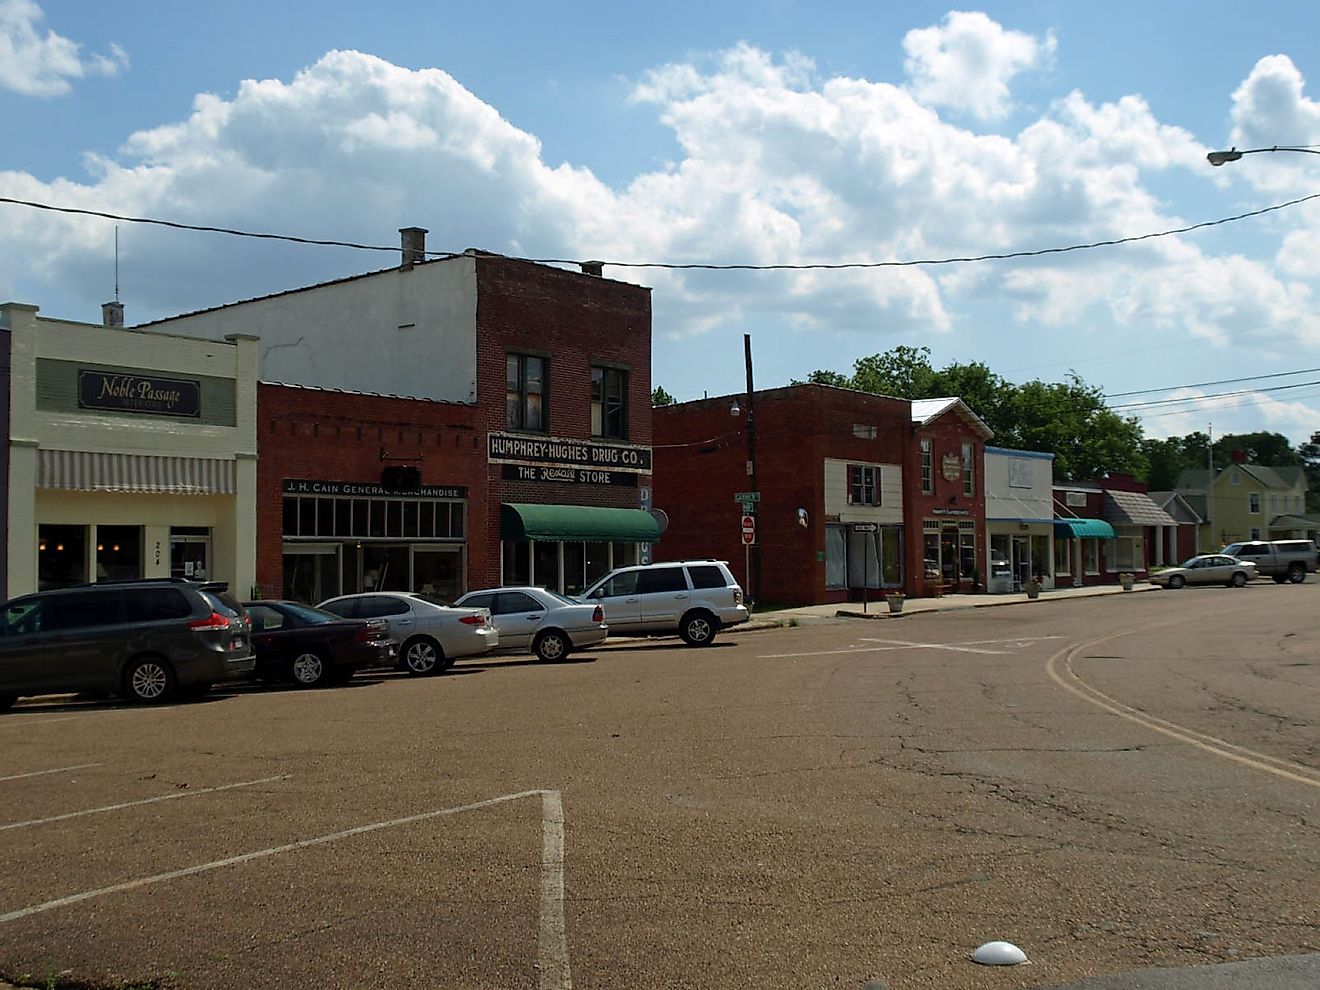 Commercial buildings on Main Street in Madison, Alabama. Image Credit: Chris Pruitt, via Wikimedia Commons